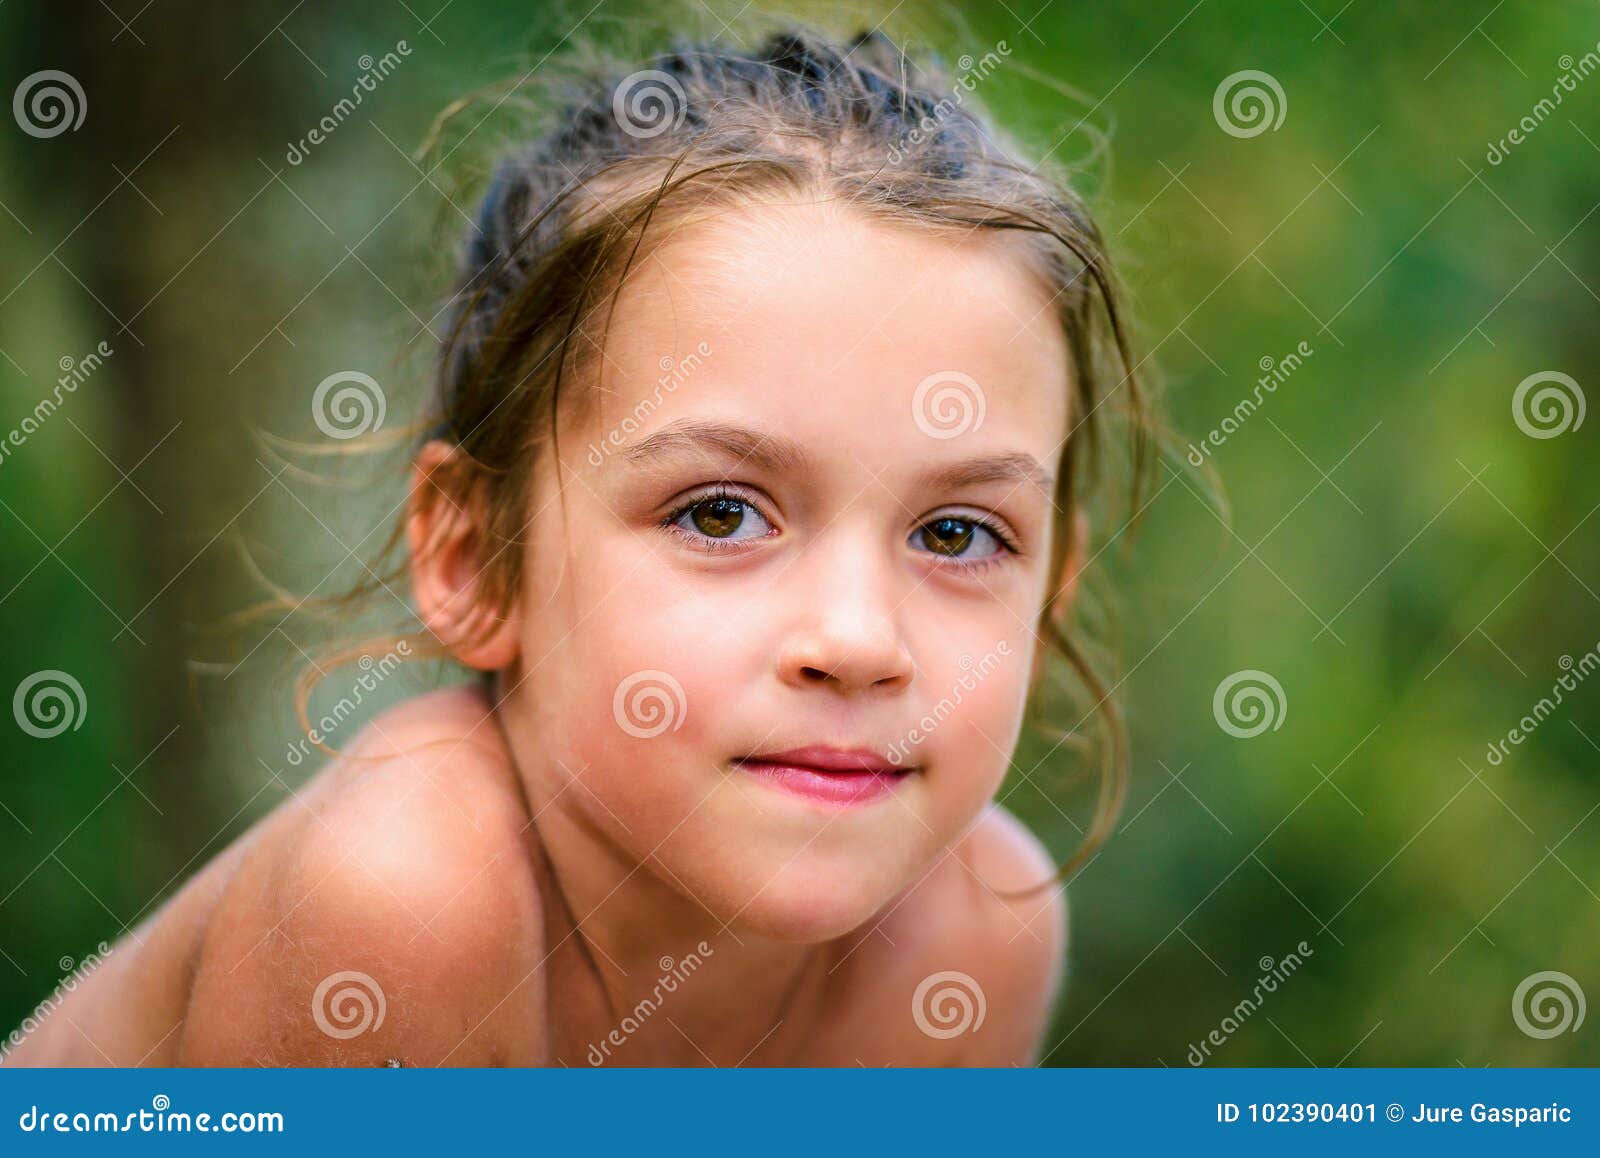 portrait of happy girl child is smiling enjoying adopted life.